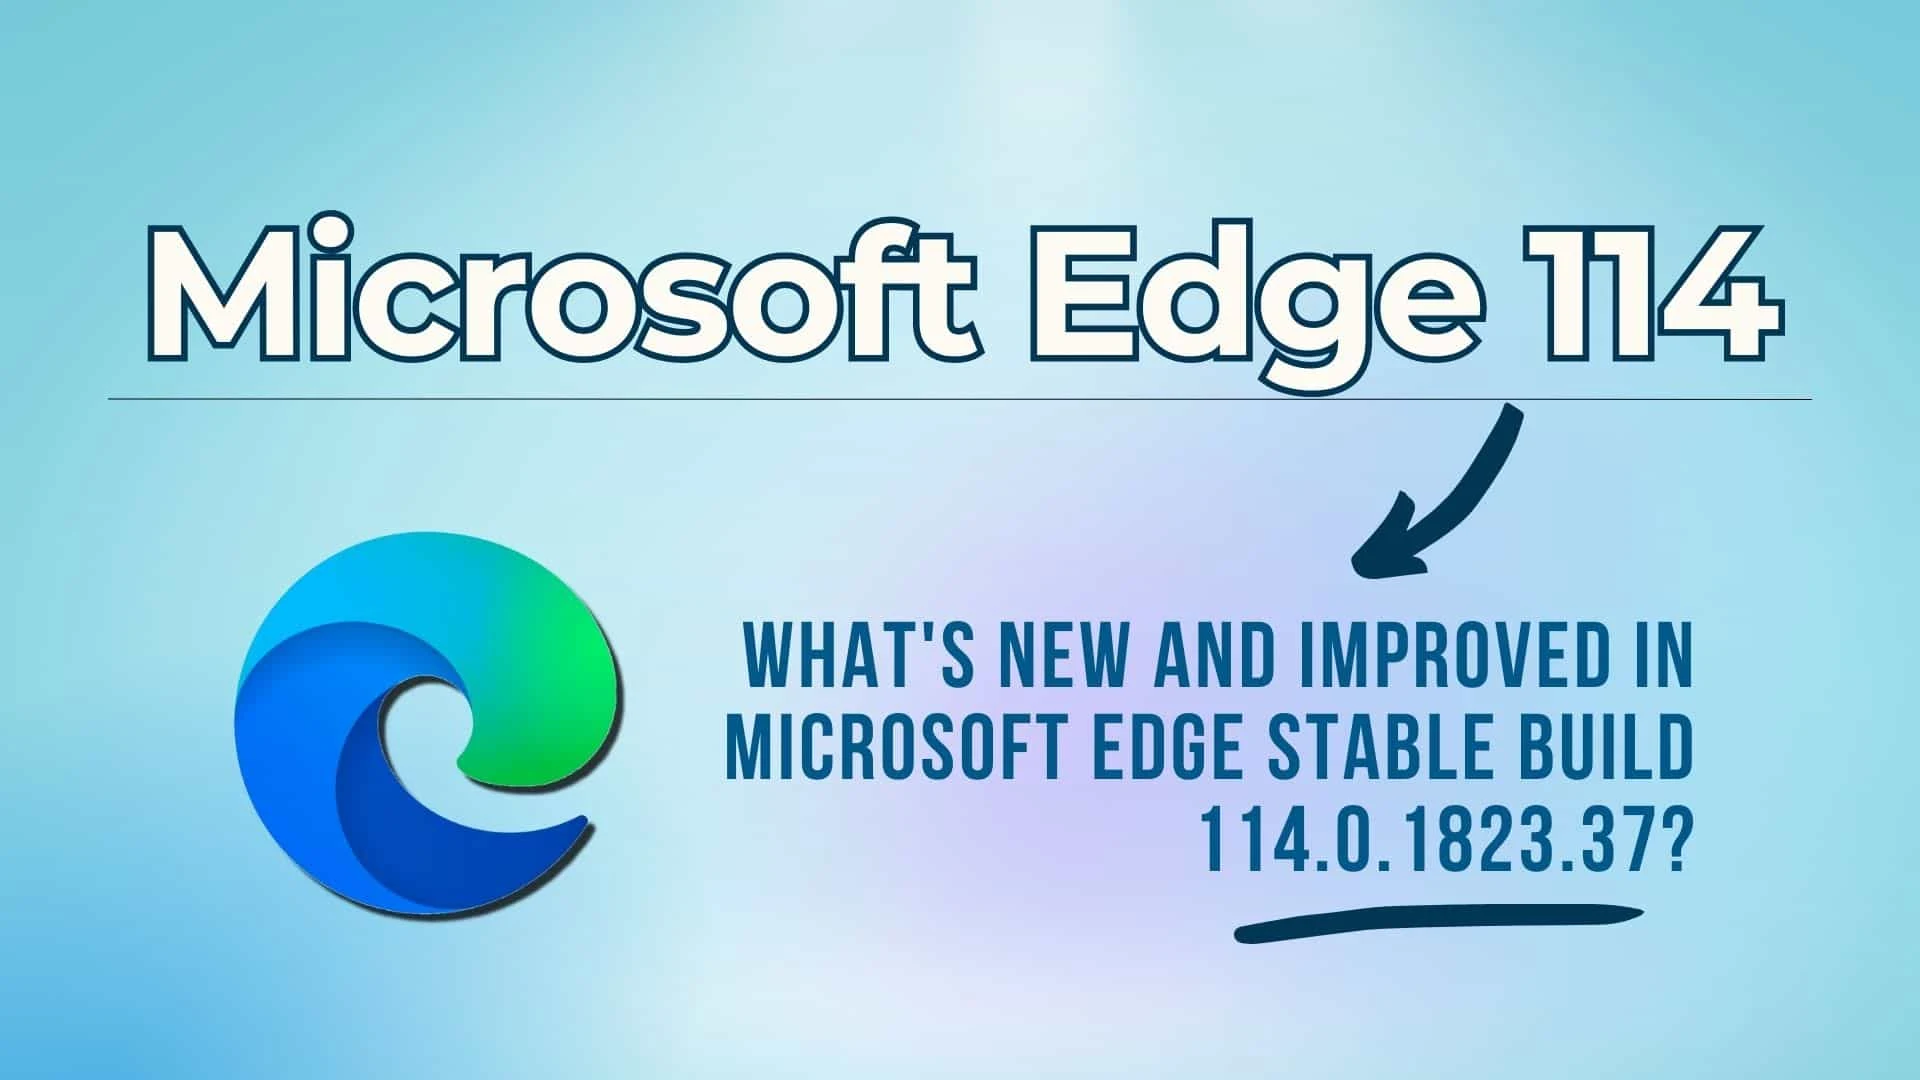 Experience Next-Level Collaboration with Edge Workspaces in Microsoft Edge